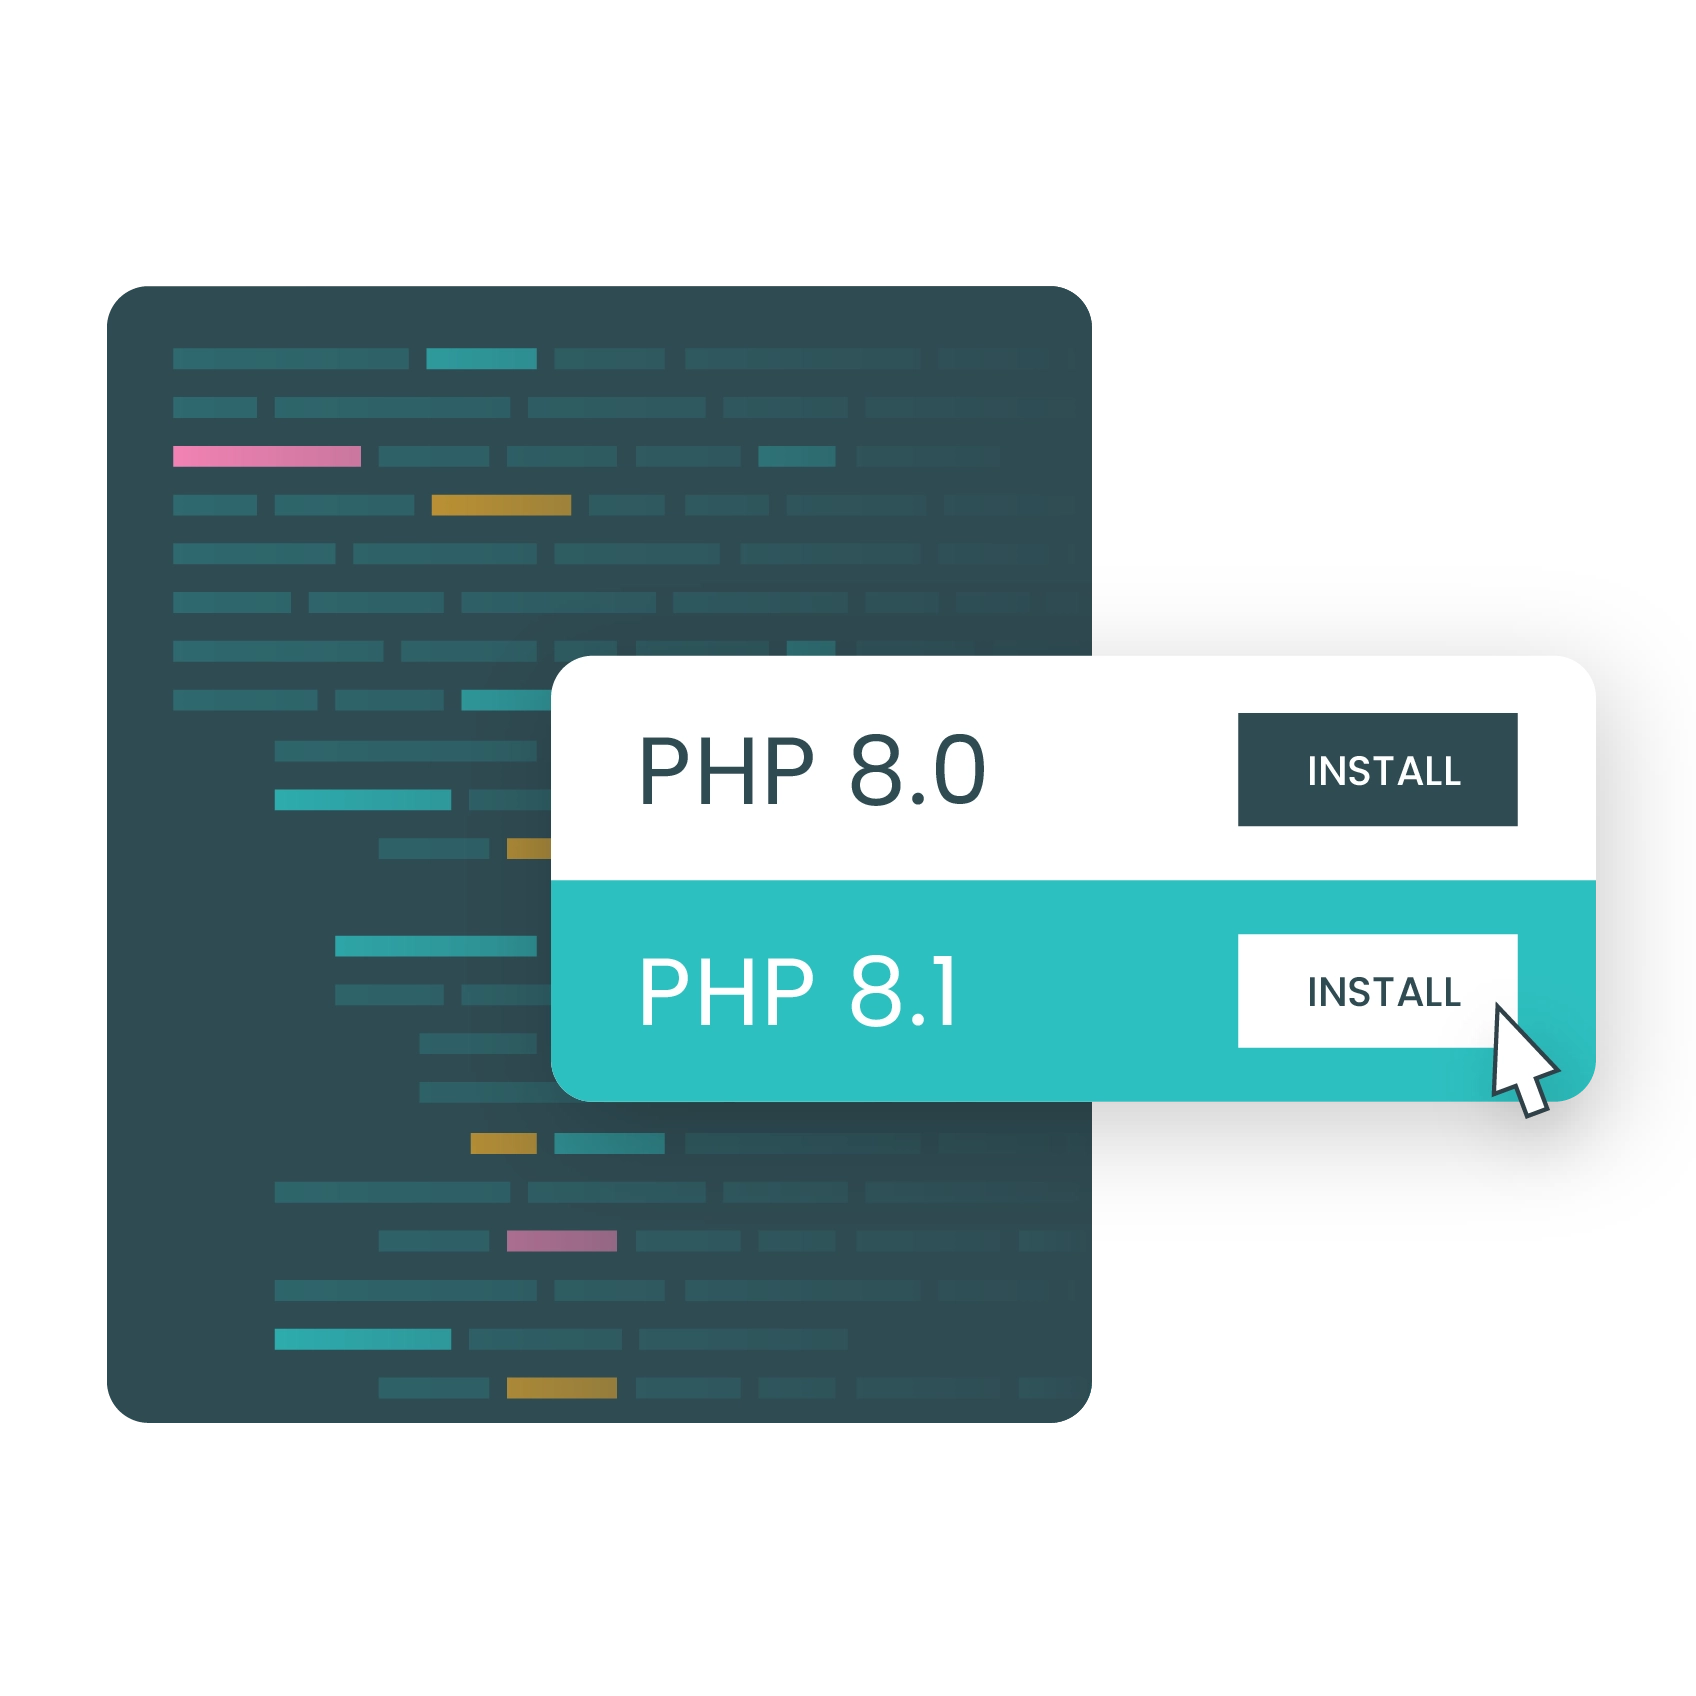 Is WordPress PHP based (and is that important)?